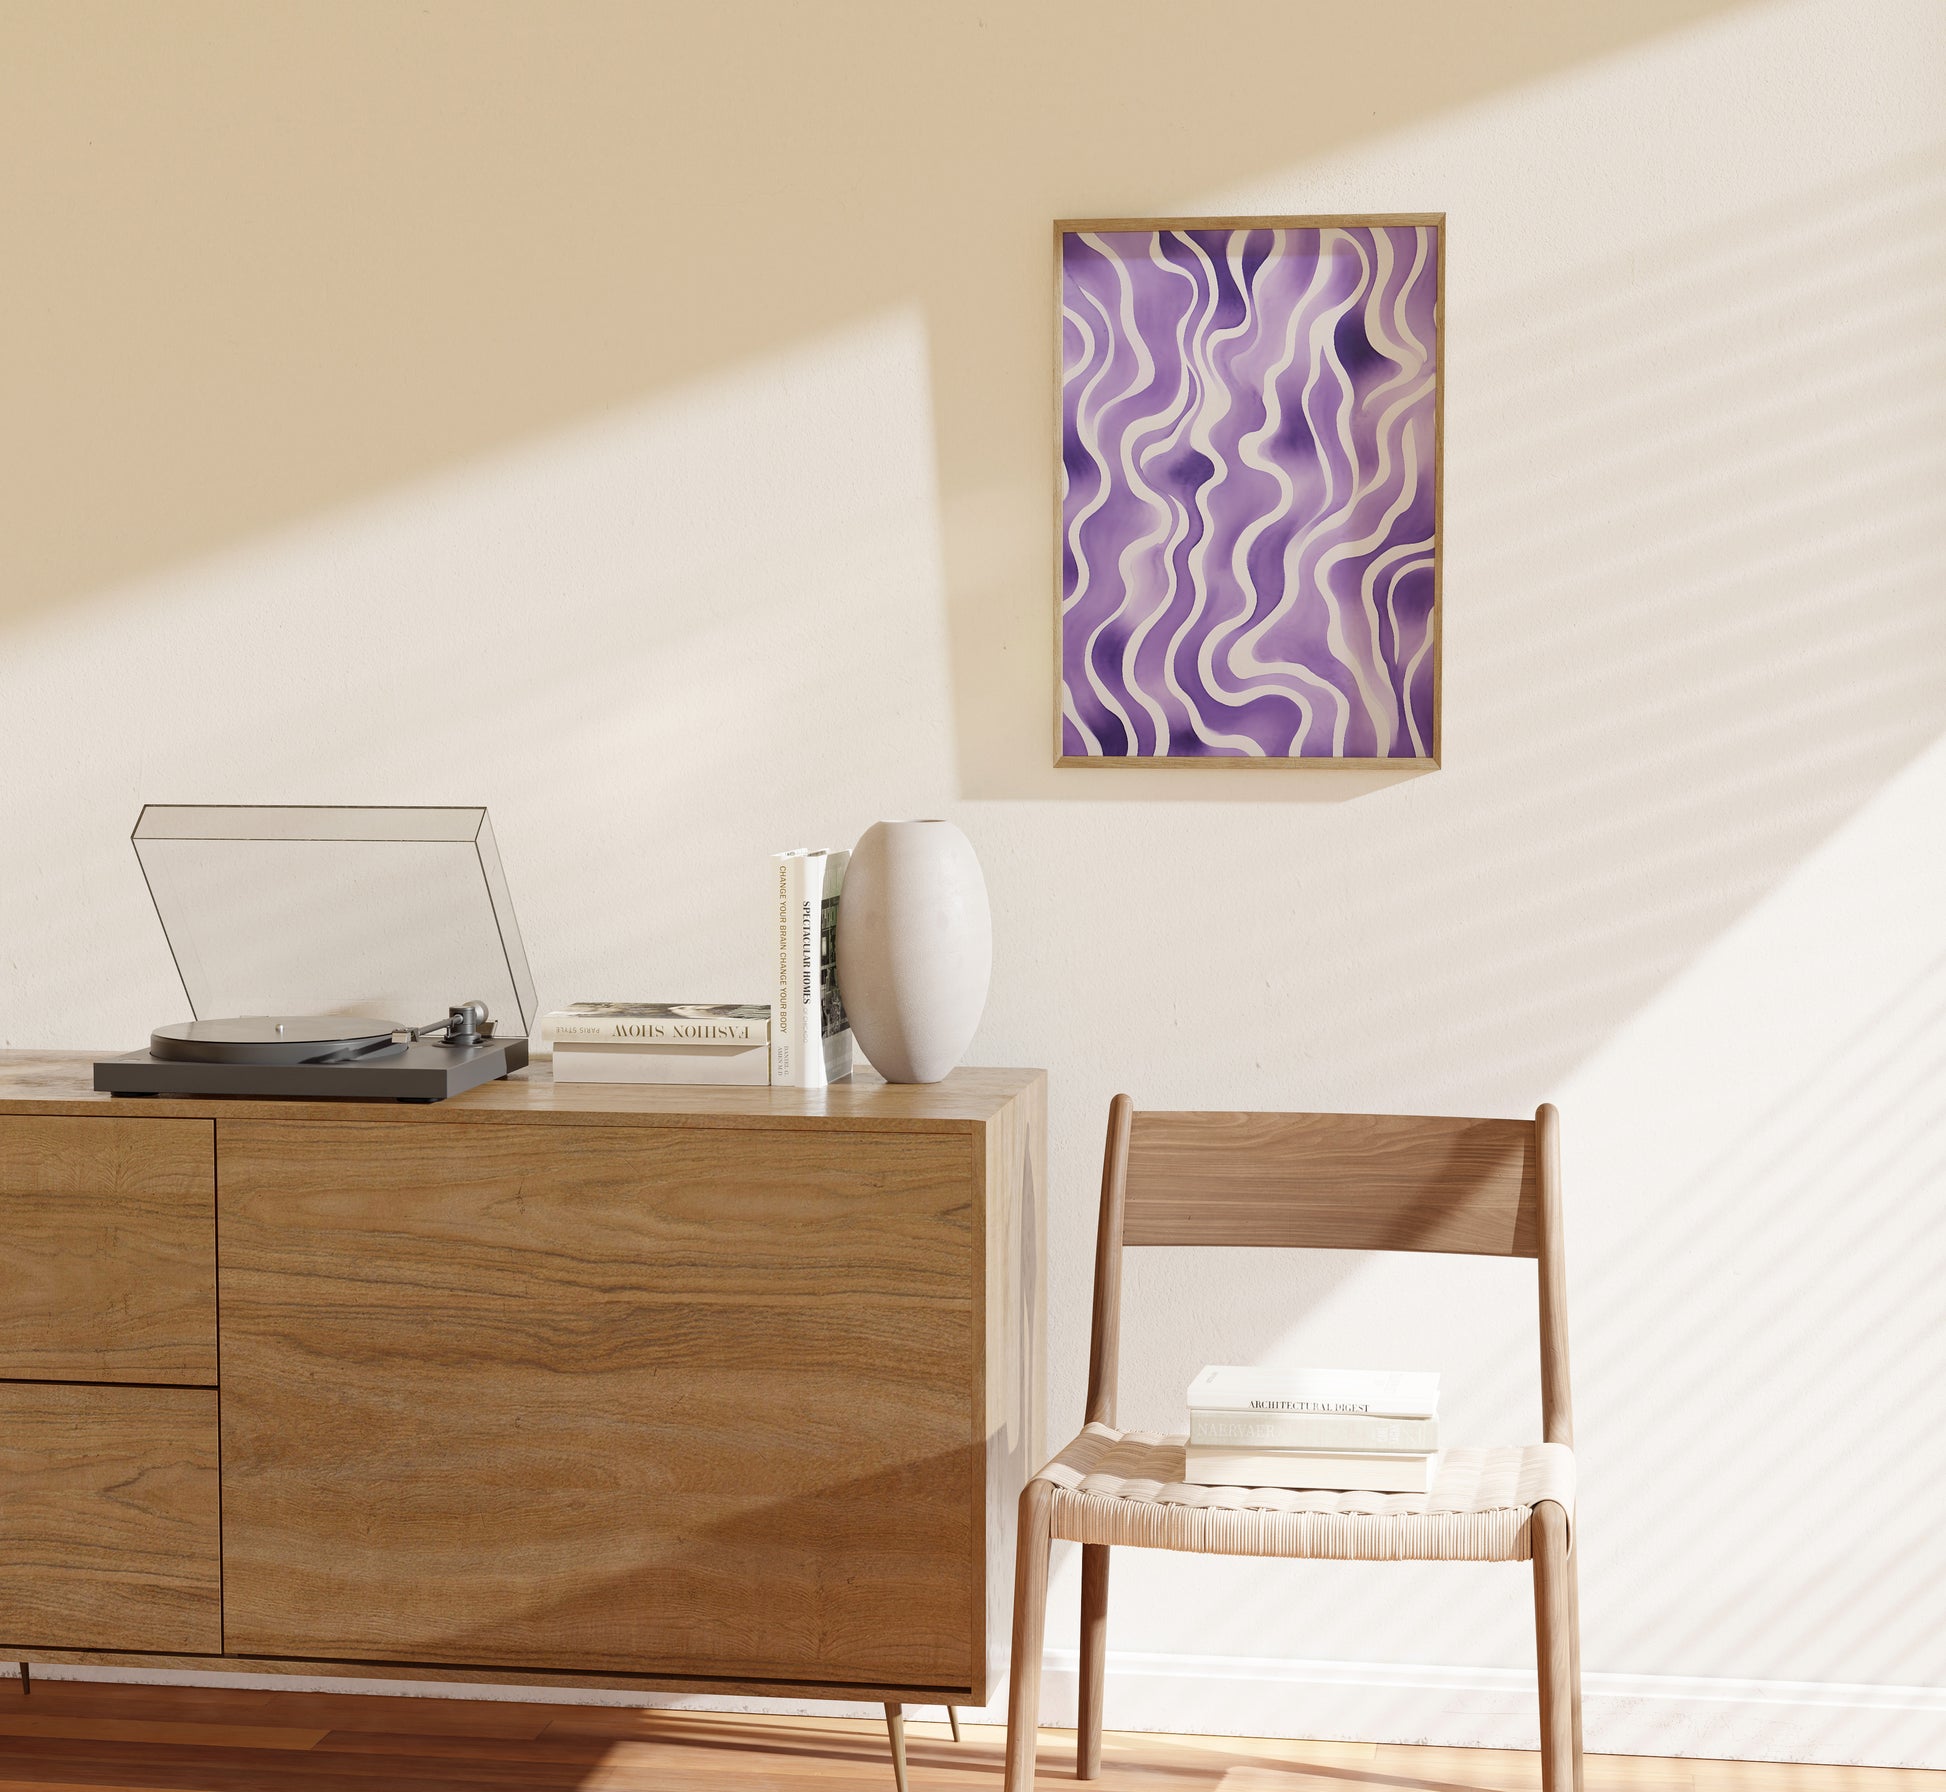 Modern room with a wooden cabinet, turntable, chair and abstract wall art.